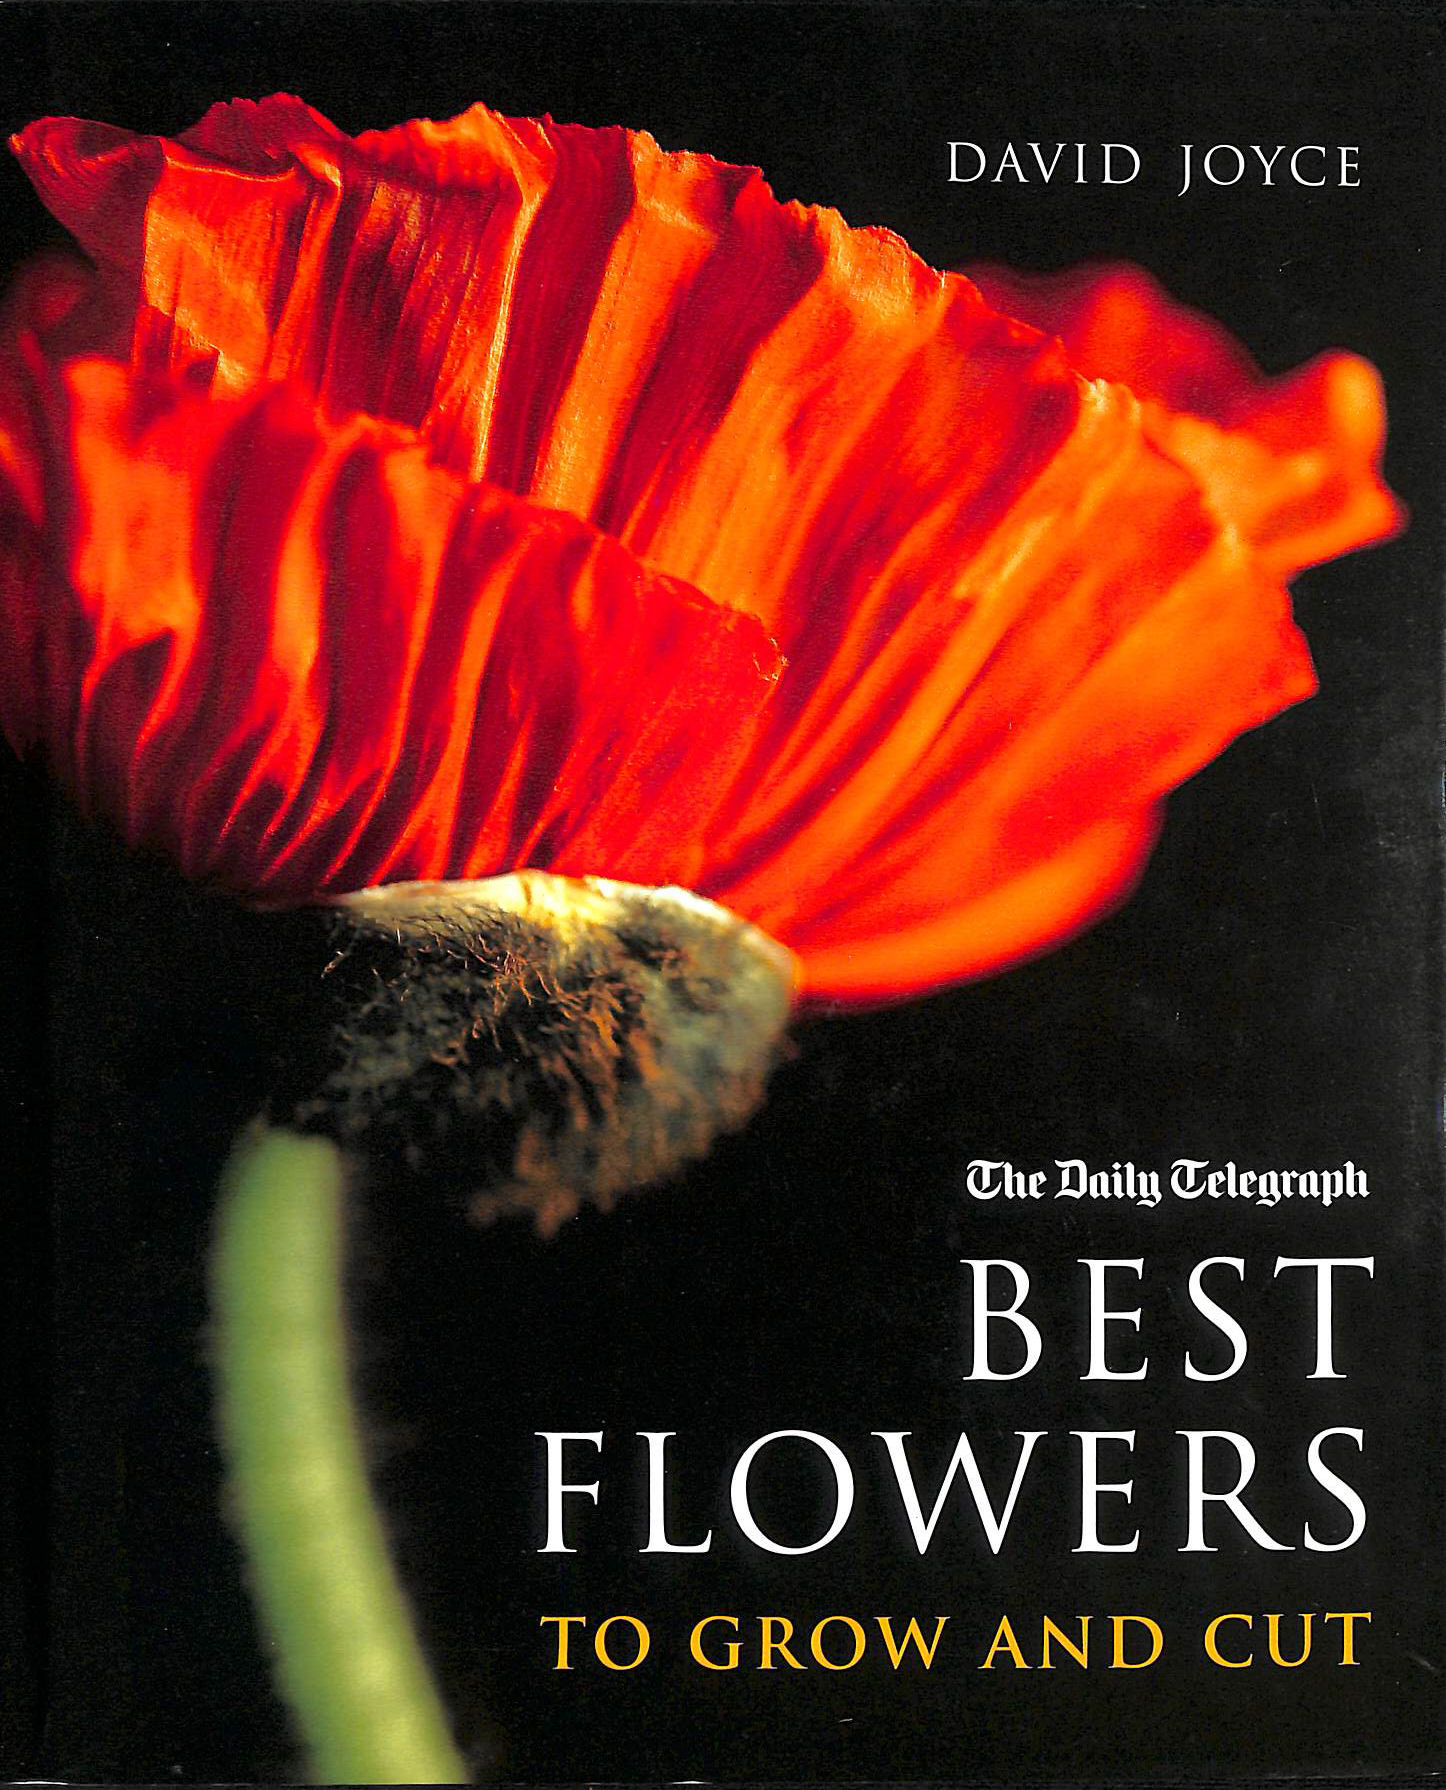 JOYCE, DAVID - The Best Flowers to Grow and Cut